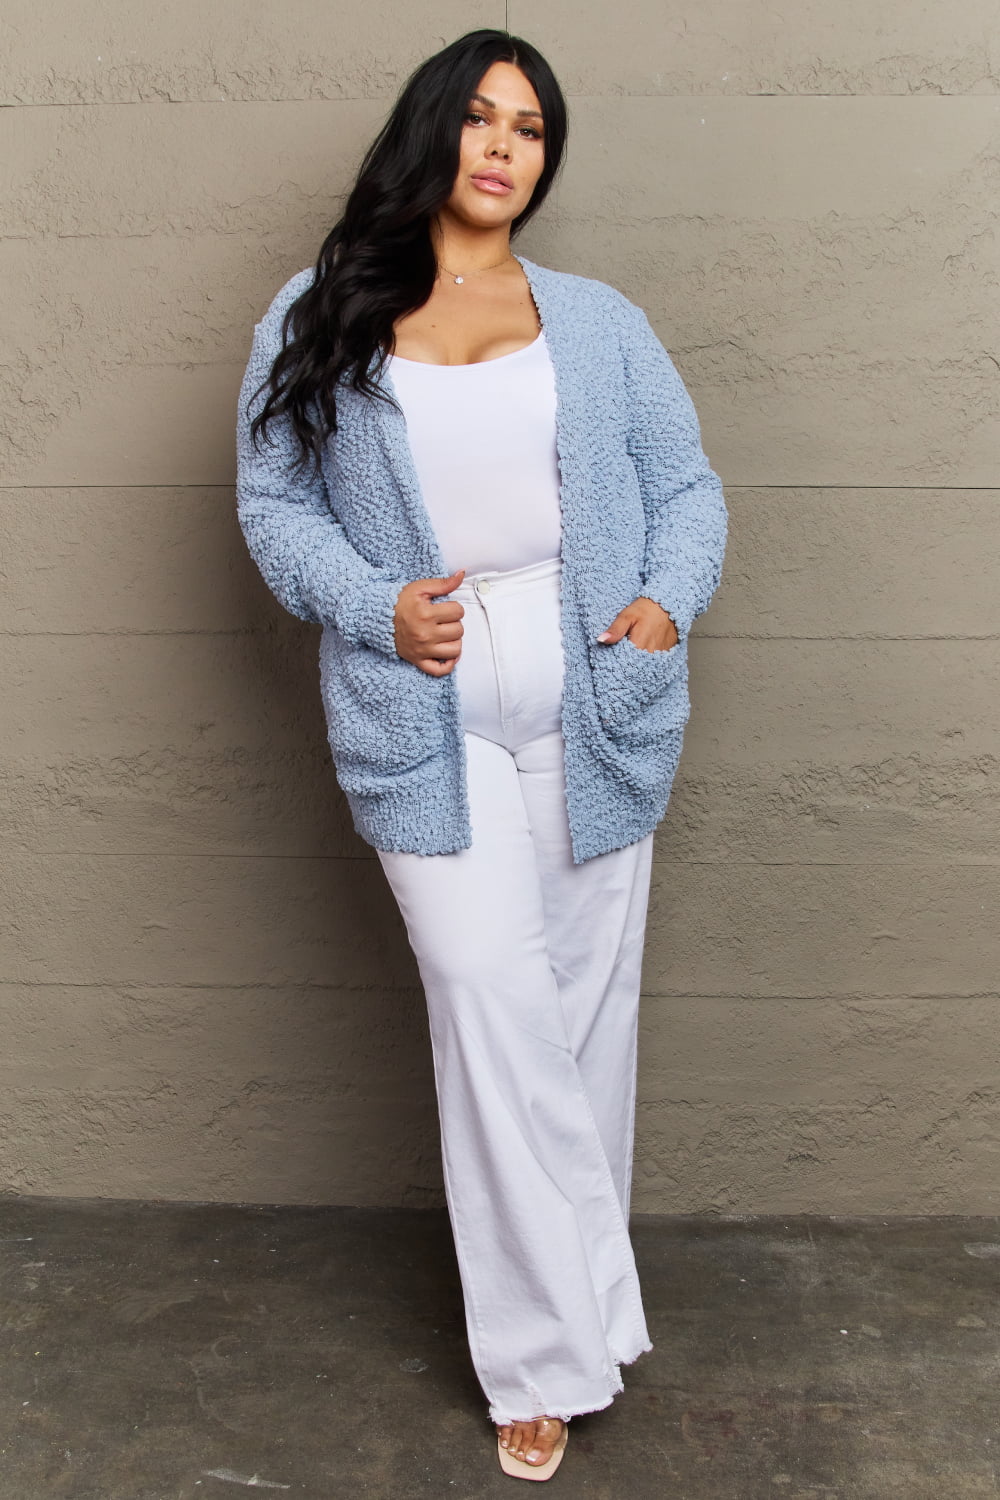 Falling For You Open Front Popcorn Cardigan